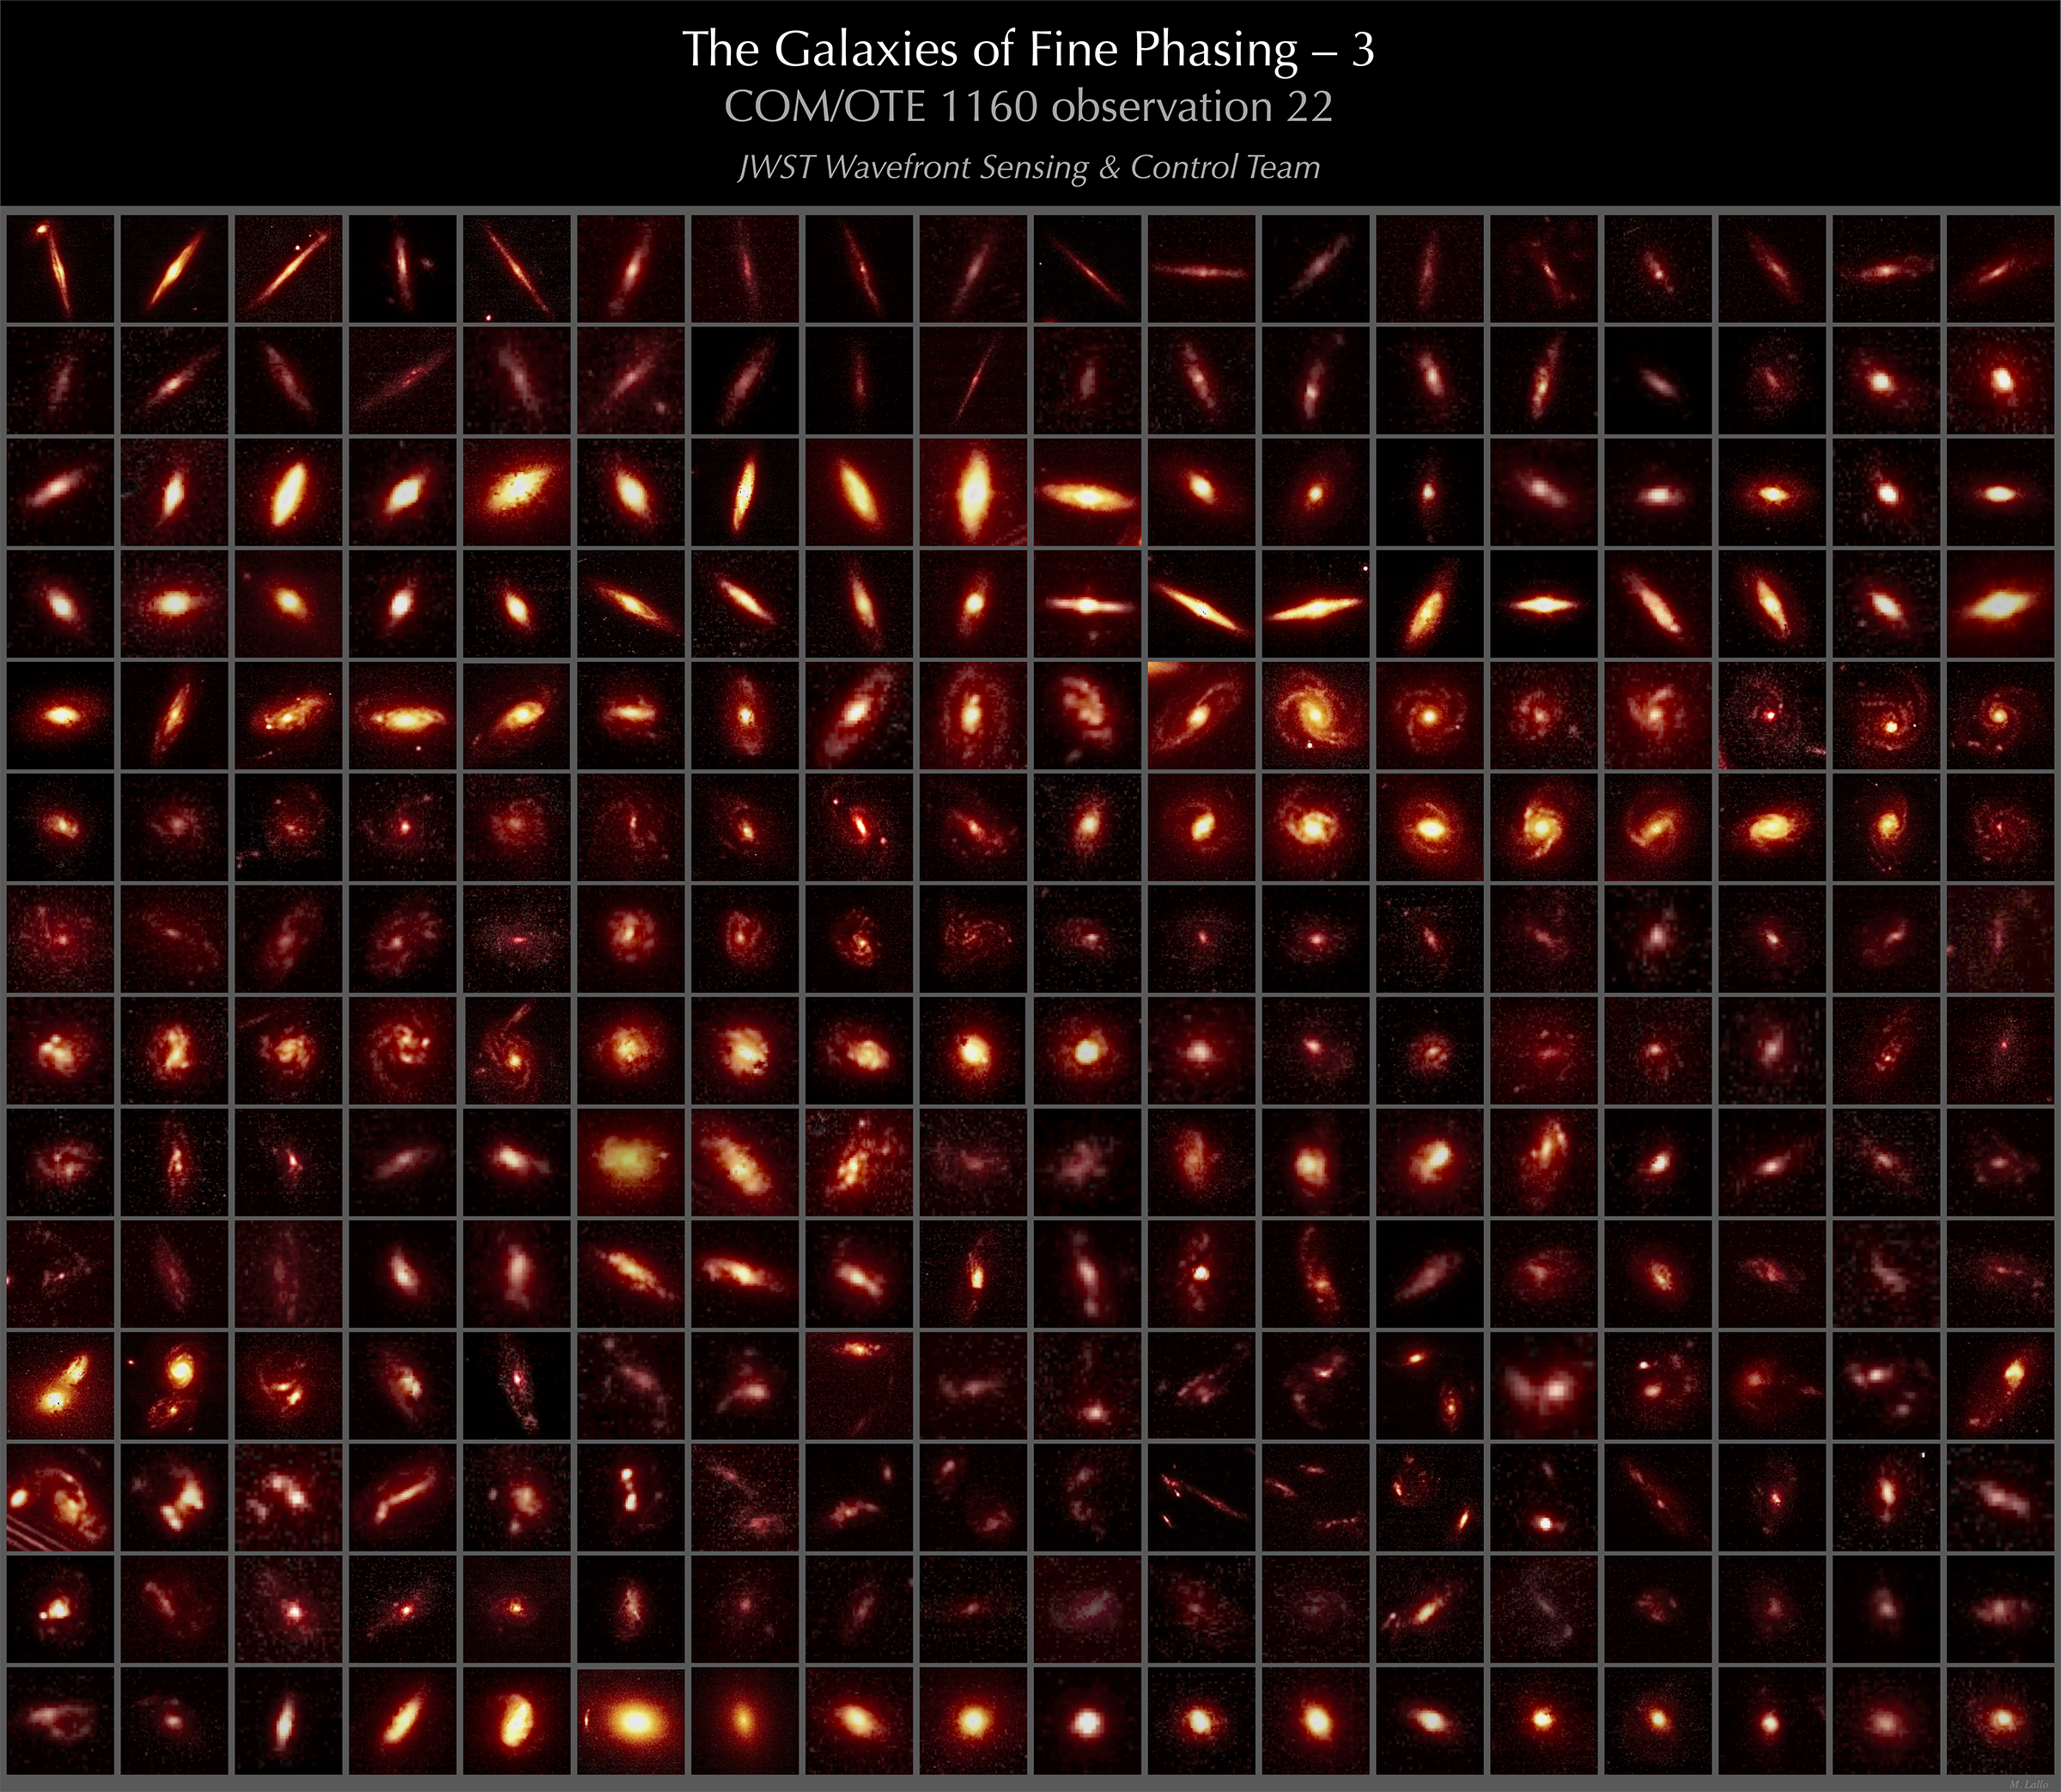 One of Acton’s colleagues extracted all the galaxies from the first image released by NASA and organized them according to their type to create this poster.